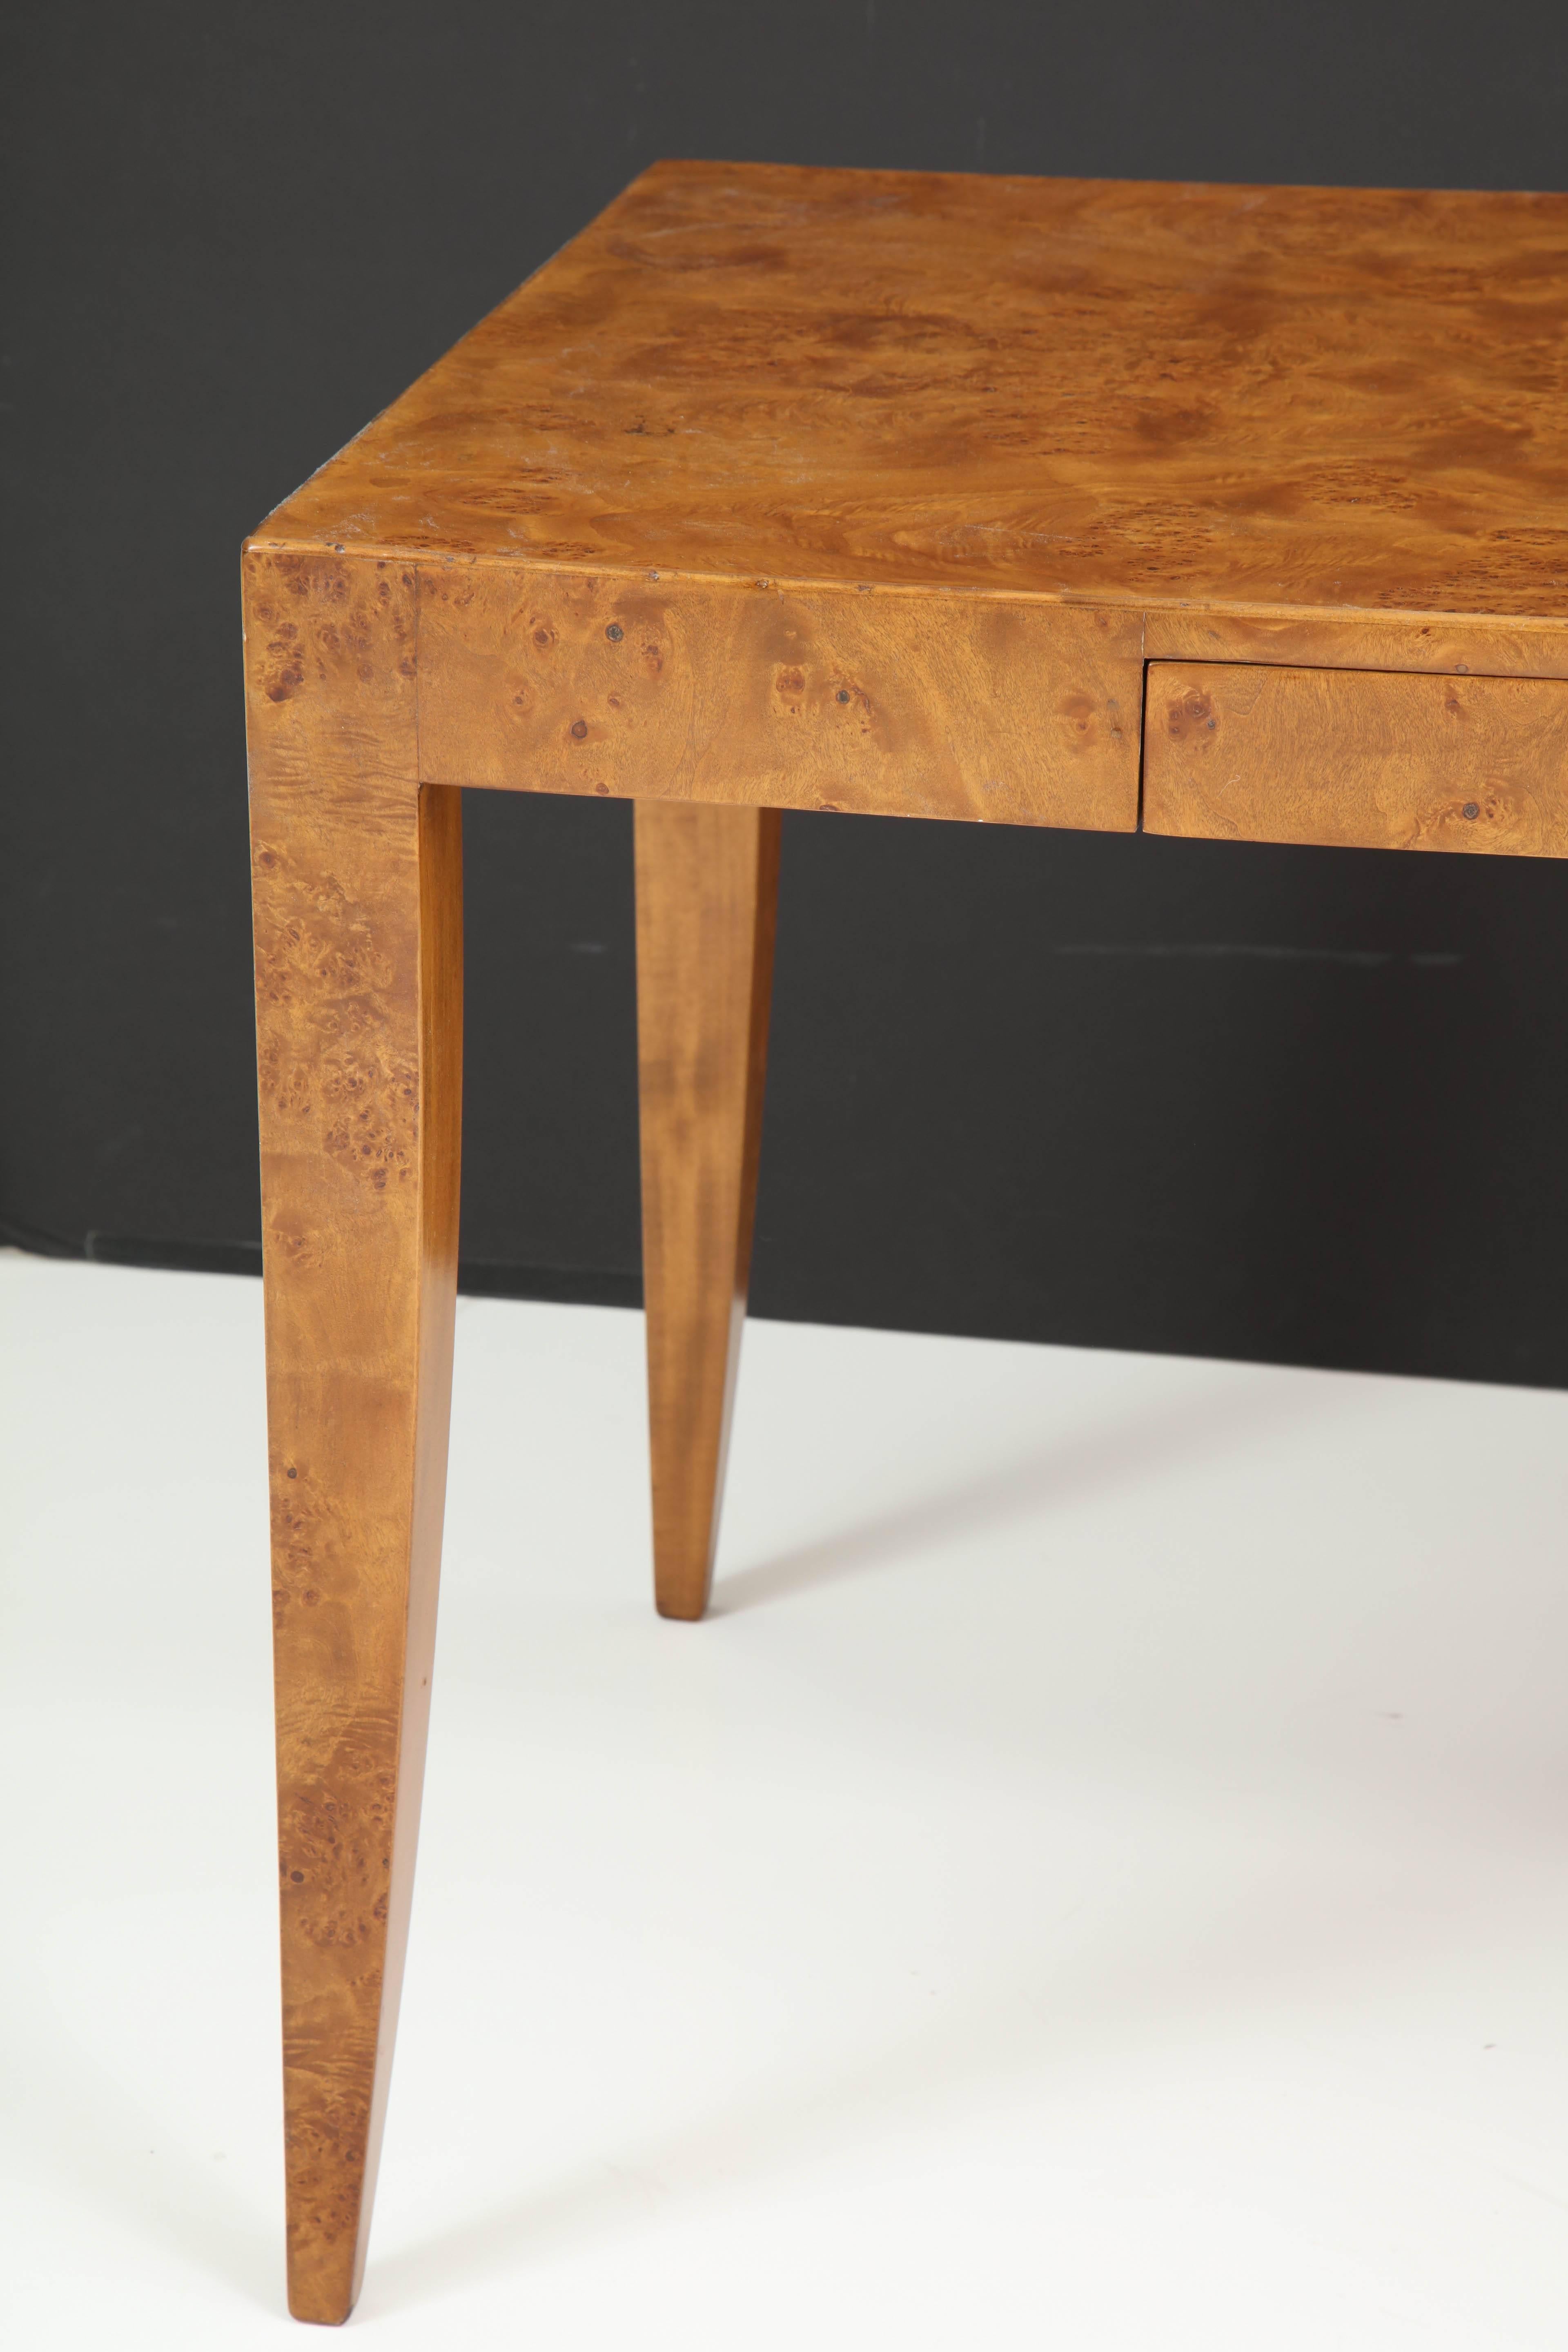 Burl Wood Italian Desk In Excellent Condition For Sale In New York, NY